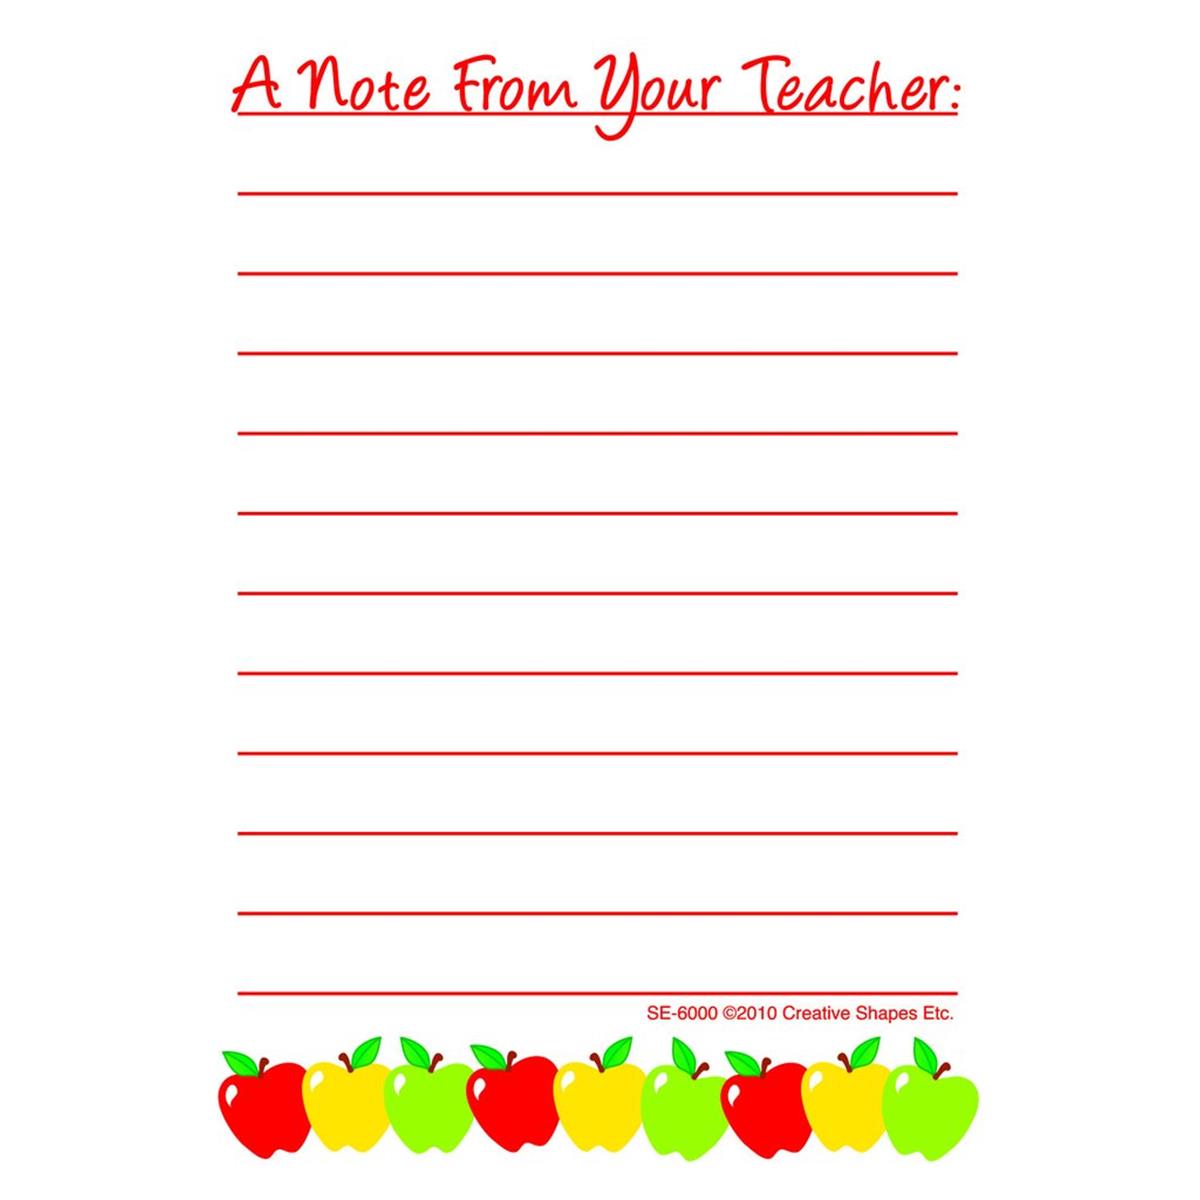 Se-6000 3.5 X 5 In. Notes & Quotes, Teacher Note - 35 Sheets Per Pack